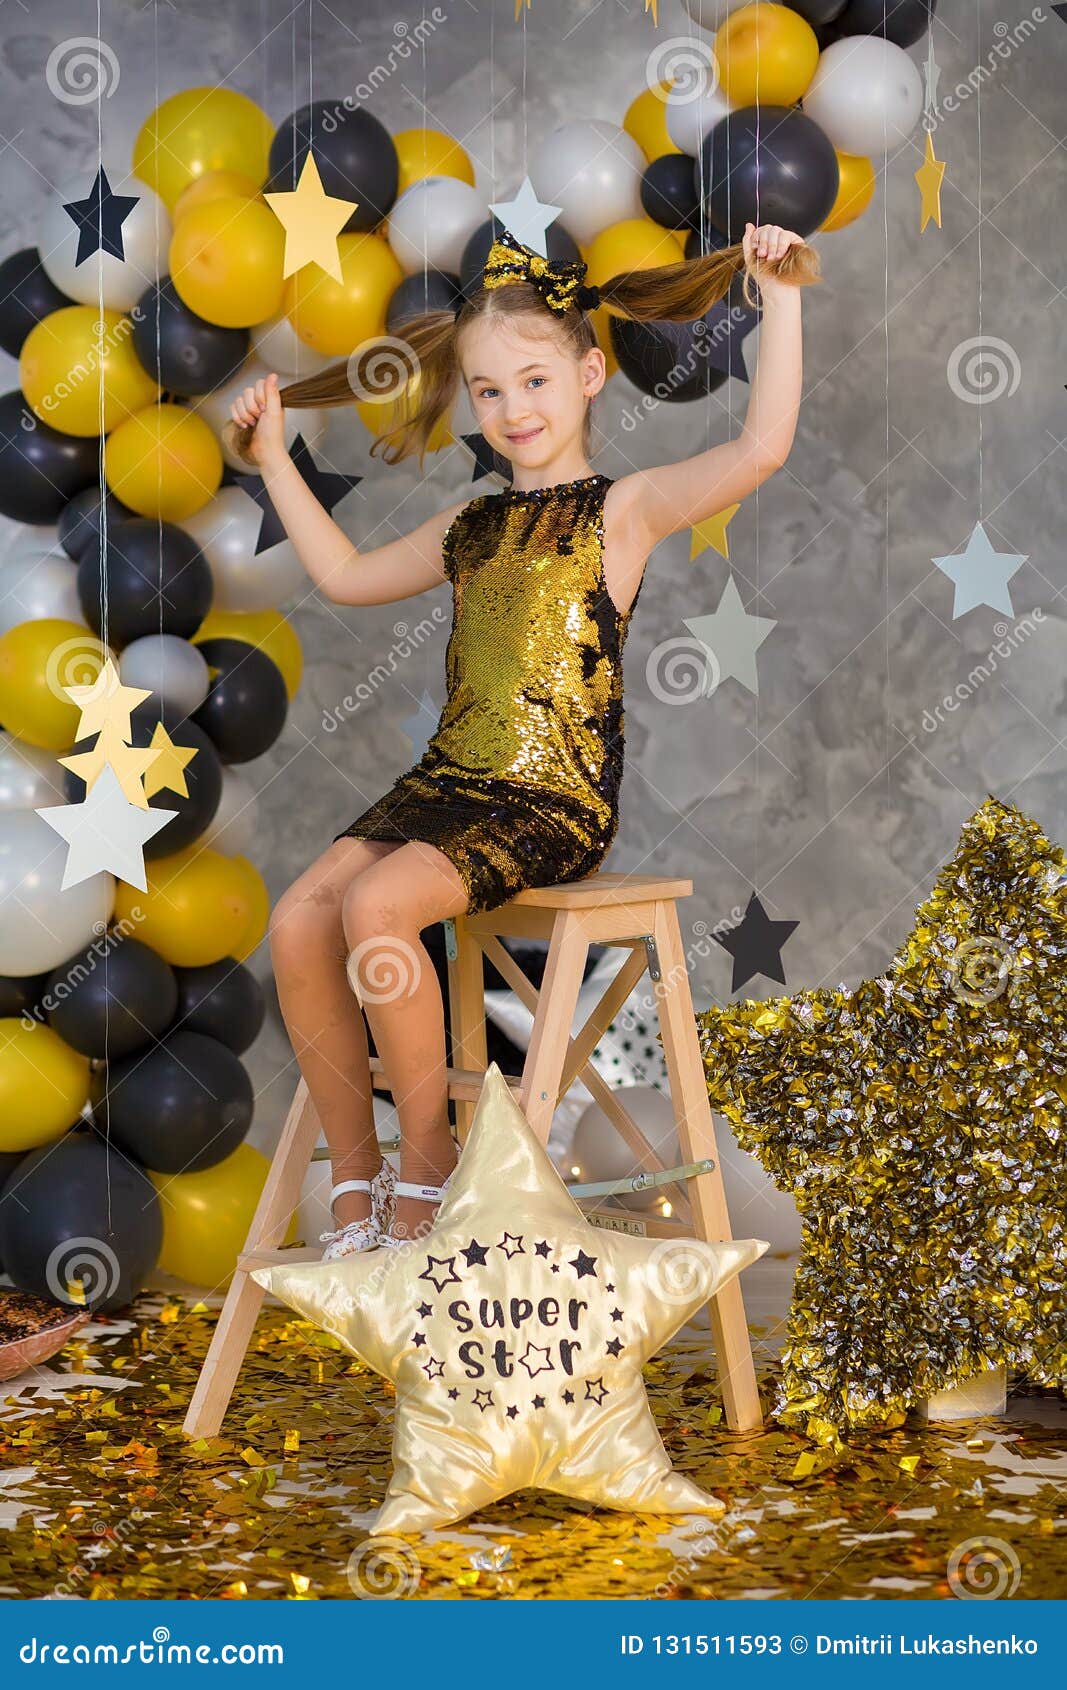 Movie Super Star Girl Model Posing In Studio Shoot With Golden Star And Colorful Baloons Wearing Stylish Gold Airy Dress With Stock Image Image Of Fashion Dress